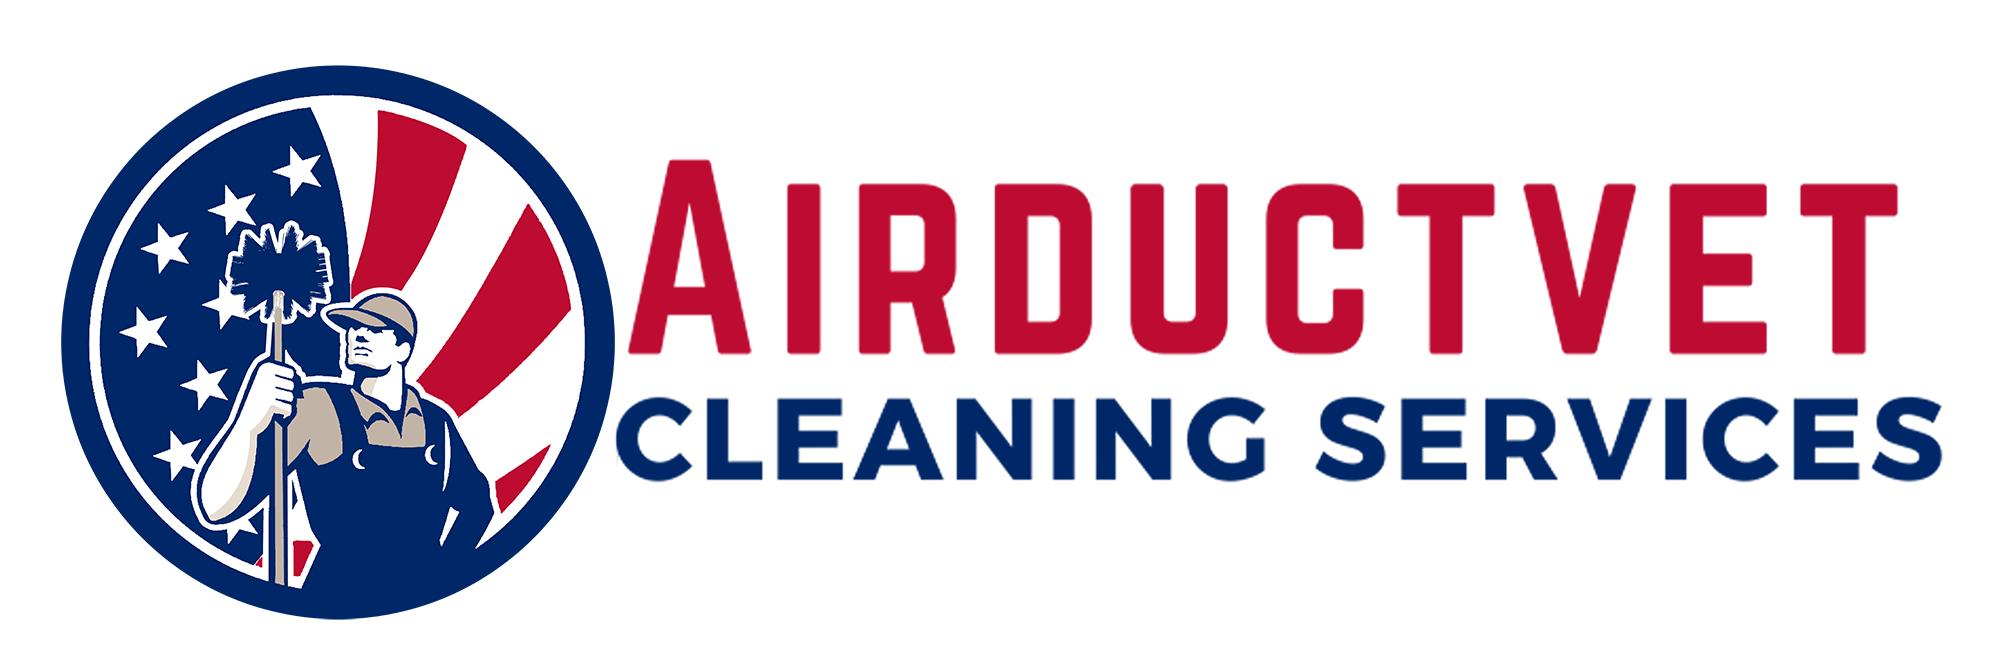  Air Duct, Ventilation, Dryer Vent Cleaning, Chimney Sweep with AirDuctVet